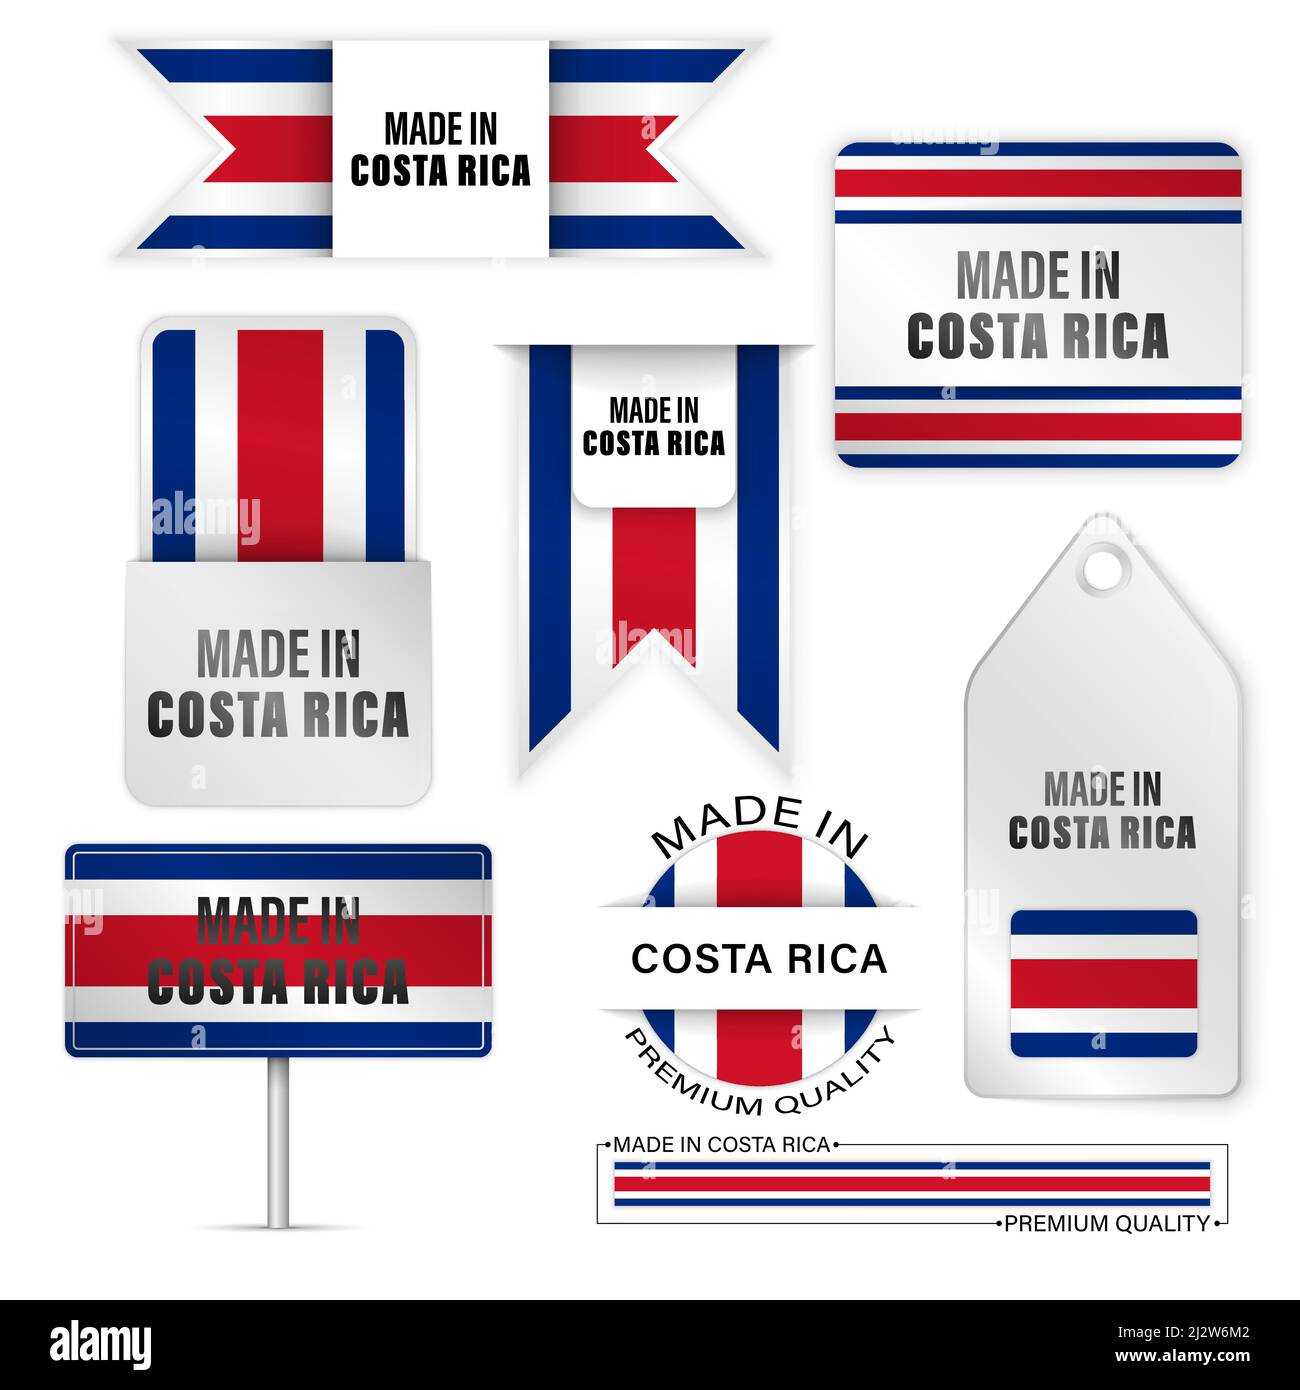 Made in Costarica graphics and labels set. Some elements of impact for the use you want to make of it. Stock Vector